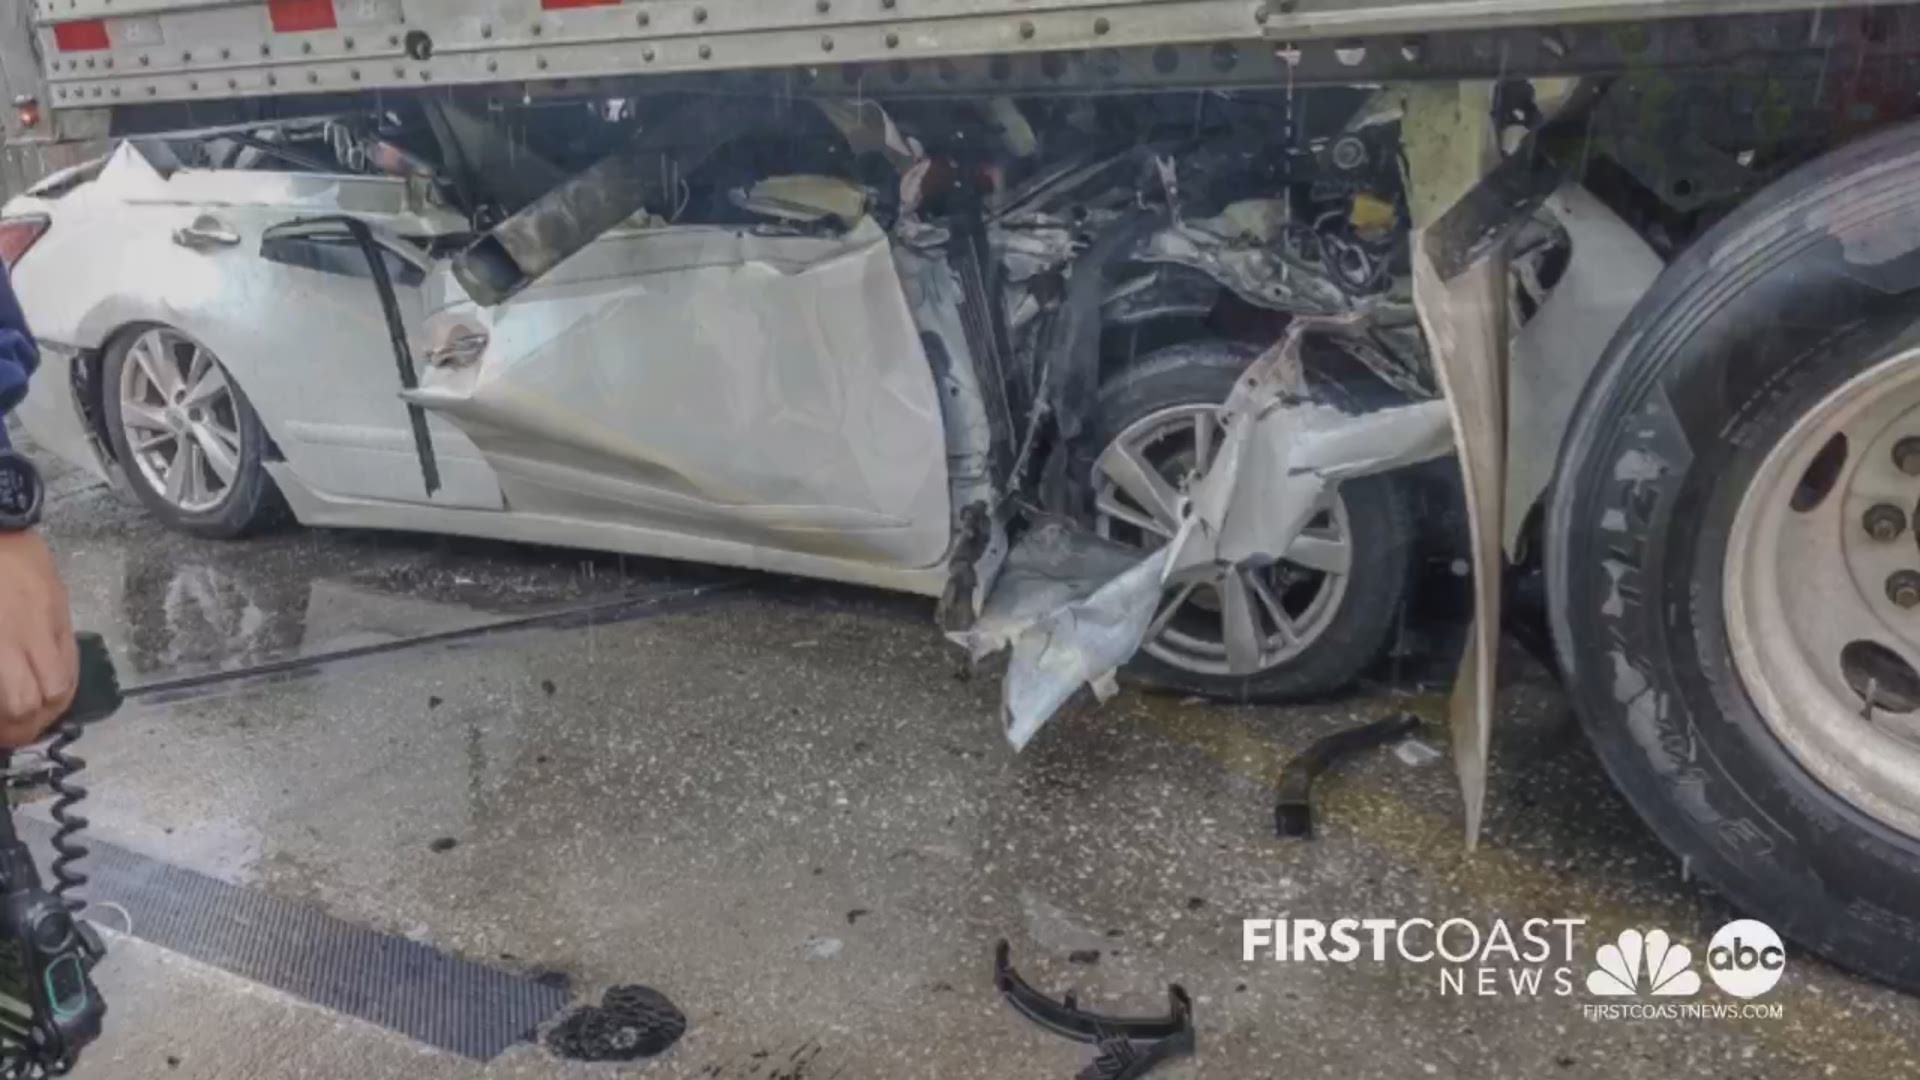 Ashley Nicole Galan, 30, of Keystone Heights, was identified as the victim of Tuesday's fatal crash involving a semi-truck on I-295 near Duval Road